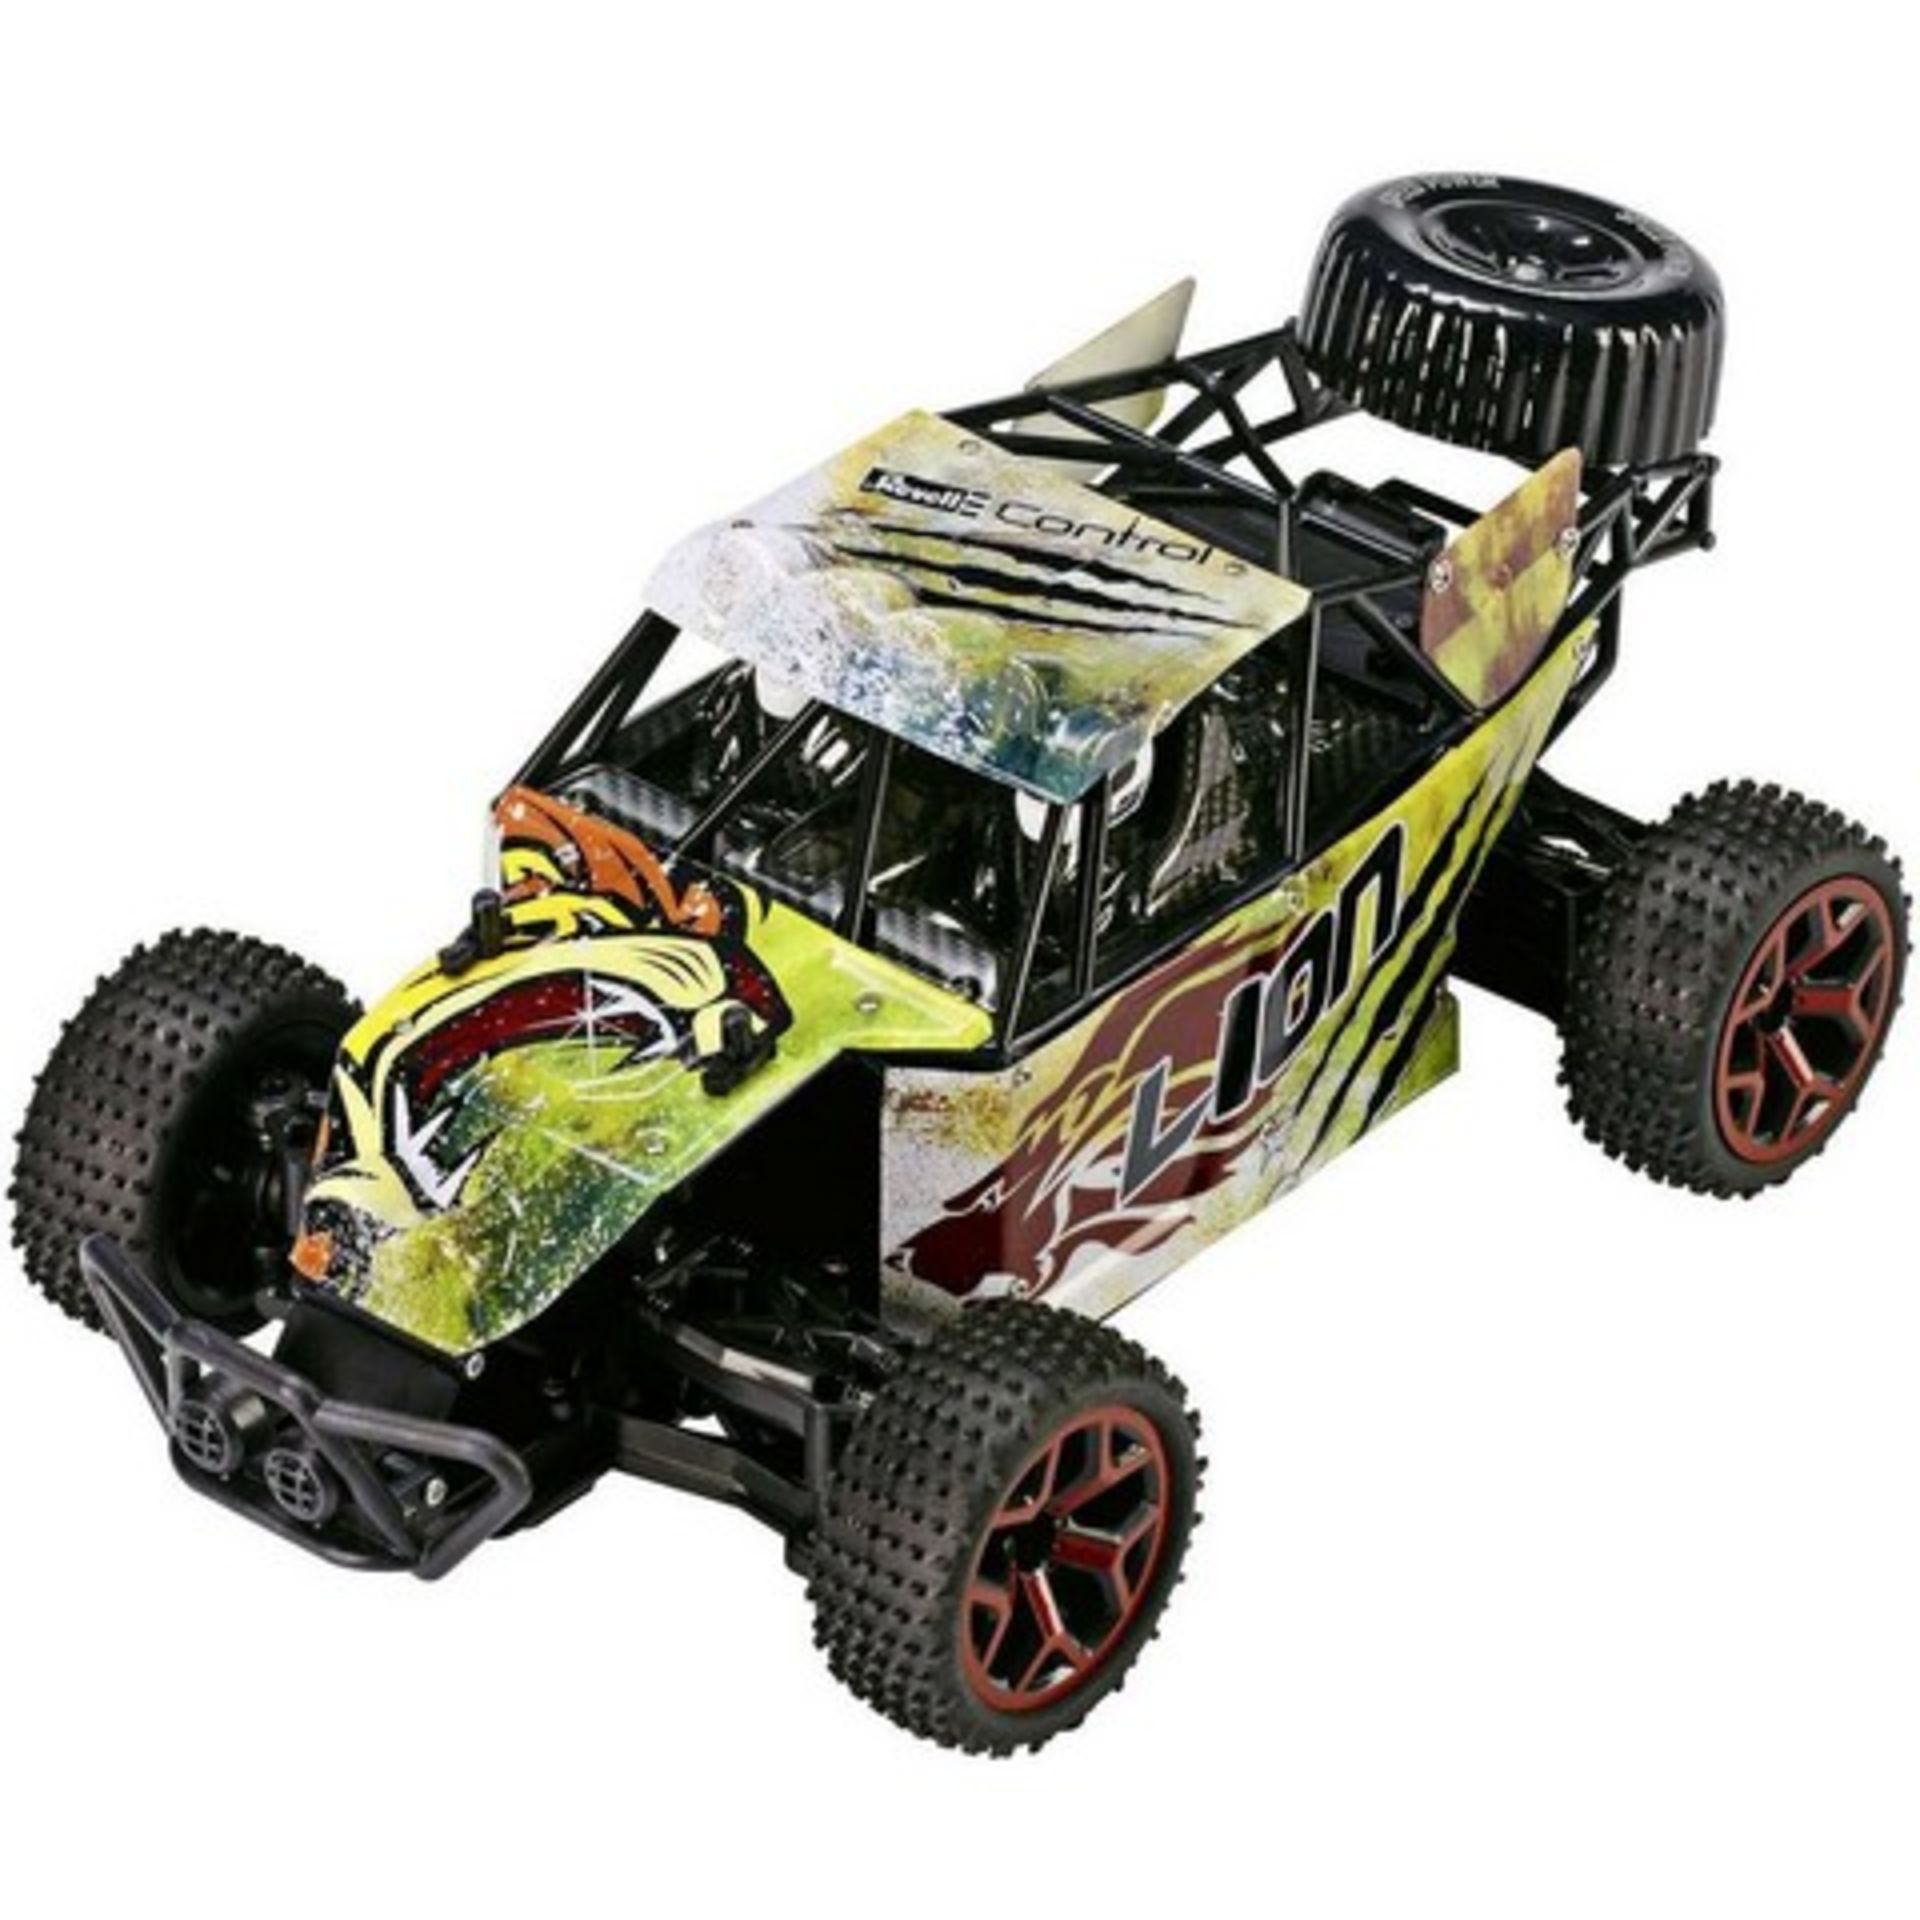 V Brand New Revell R/C 4 Wheel Drive Sand Buggy Lion Up To 15 kph 2.4GHz 2 Channel Remote Control